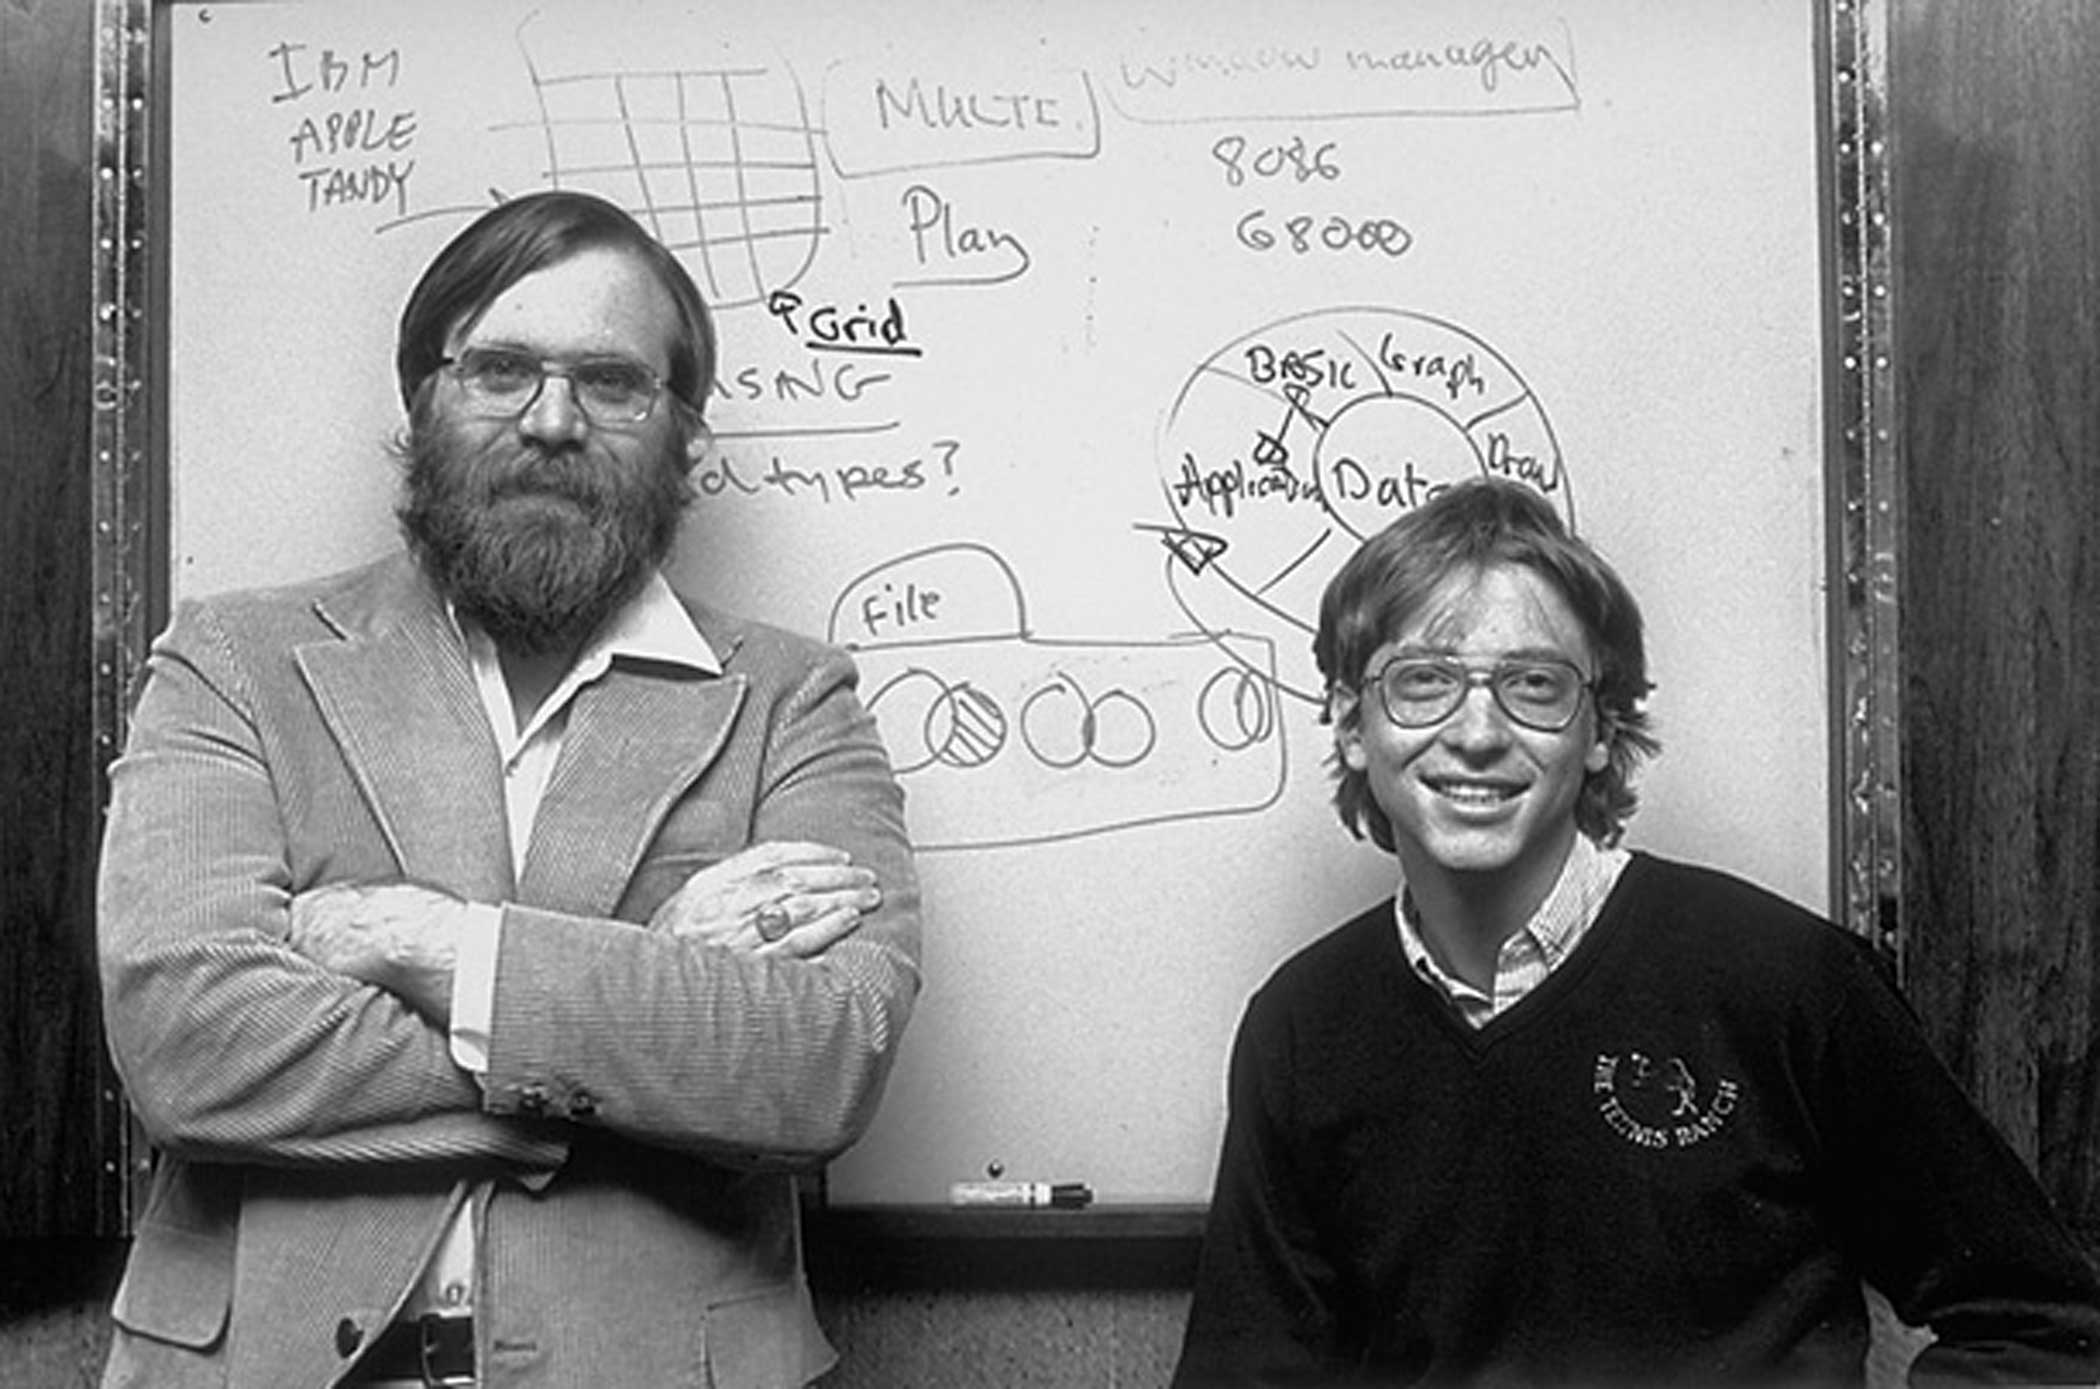 Microsoft co-founders Paul Allen (L) &amp; Bill Gates (R).Filing Place: FC 17513Subject Date: 0/0/1982Last Published: October 2, 1995Series: FORTUNETitle: Caption: Microsoft co-founders Paul Allen (L) &amp; Bill Gates (R).City: SEATTLEState/Province: WACountry: USPhotographer: BARRY WONGPhotog Status: FREELANCEAgency: SEATTLE TIMESSyndication By: AGENCYSubjects: Personalities: GATES, WILLIAM H. III ALLEN, PAULSource: FORTUNERef No: 05836435.JPGMedium: B/W TRANSPARENCY